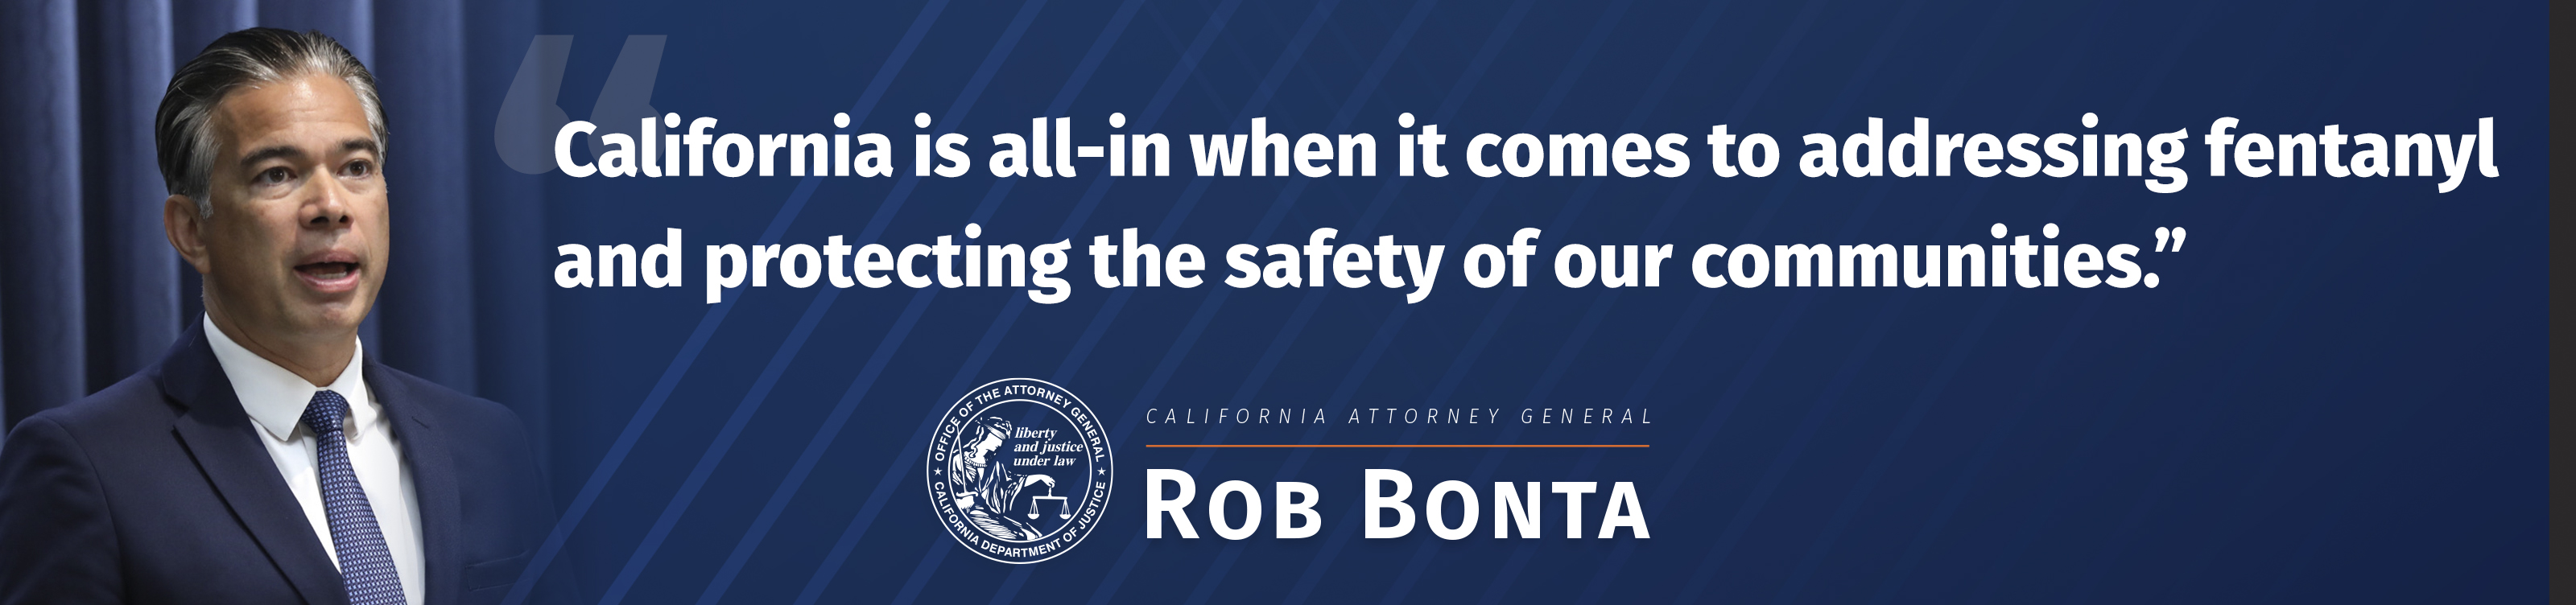 Phot of AG Bonta with quote California is all-in when it comes to addressing fentanyl and protecting the safety of our communities.